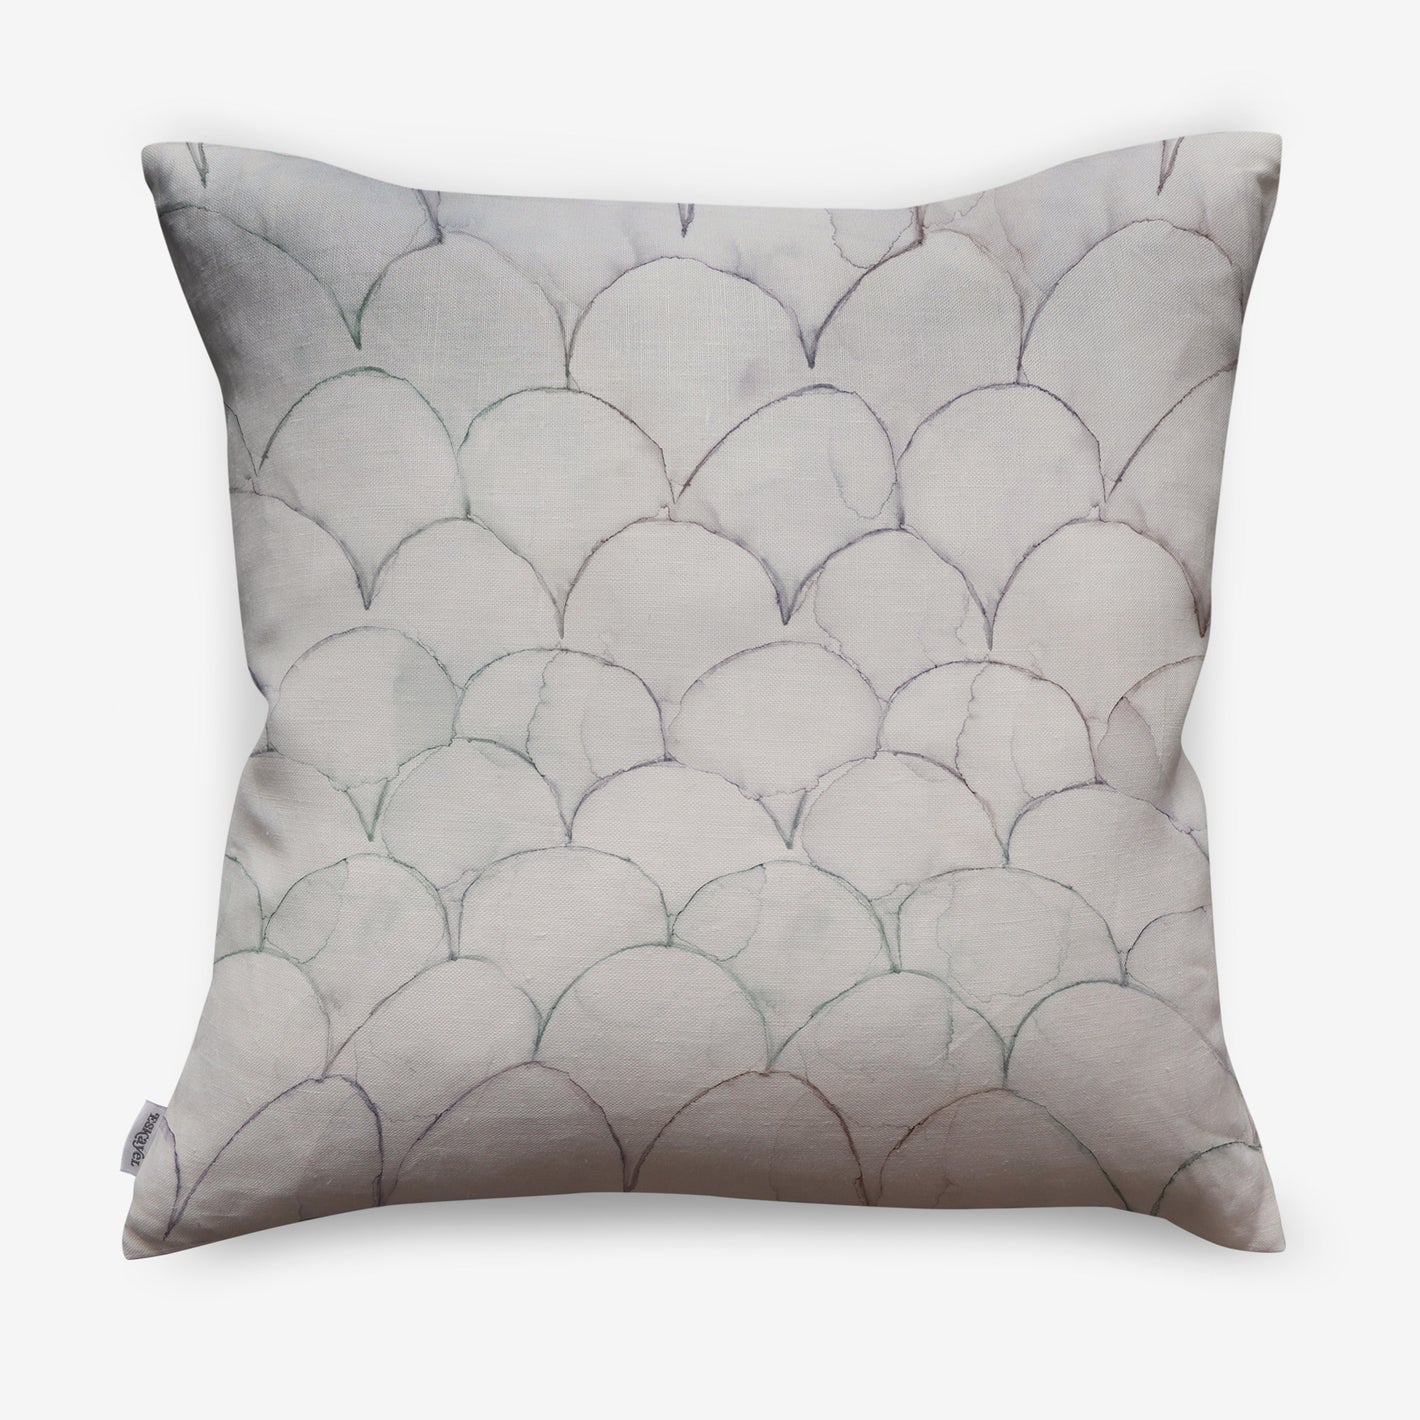 A white pillow with fish scales